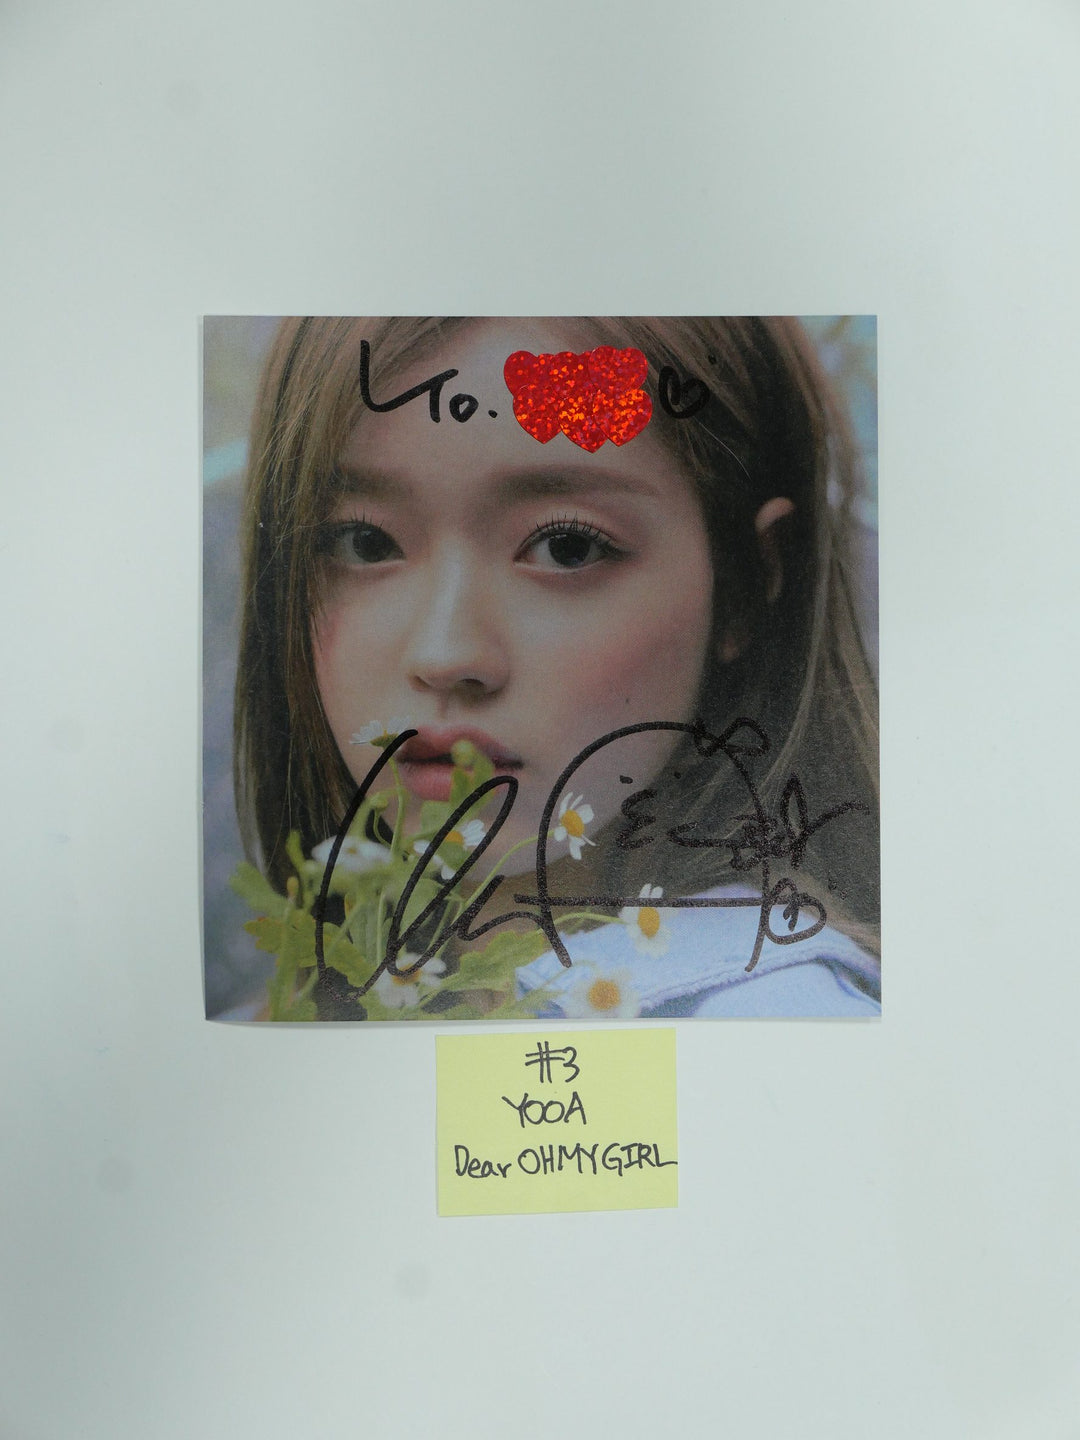 Oh My Girl 'Dun Dun Dance' - A Cut Page From Fansign Event Album Photo